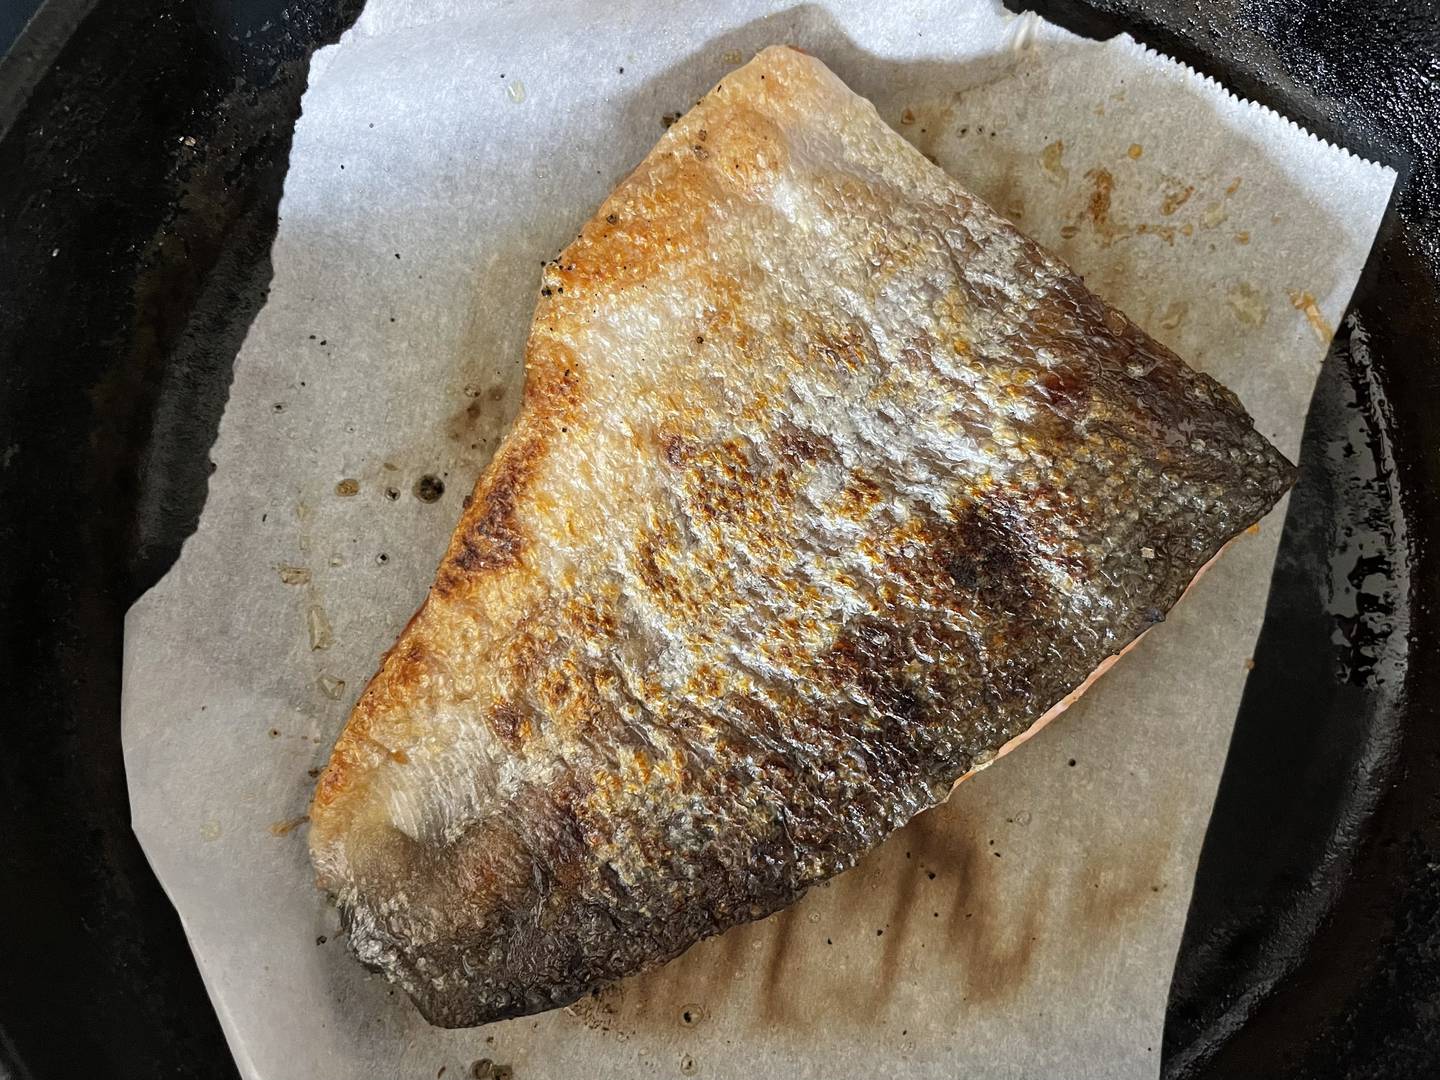 How to Use Parchment Paper for Crispy Fish Skin